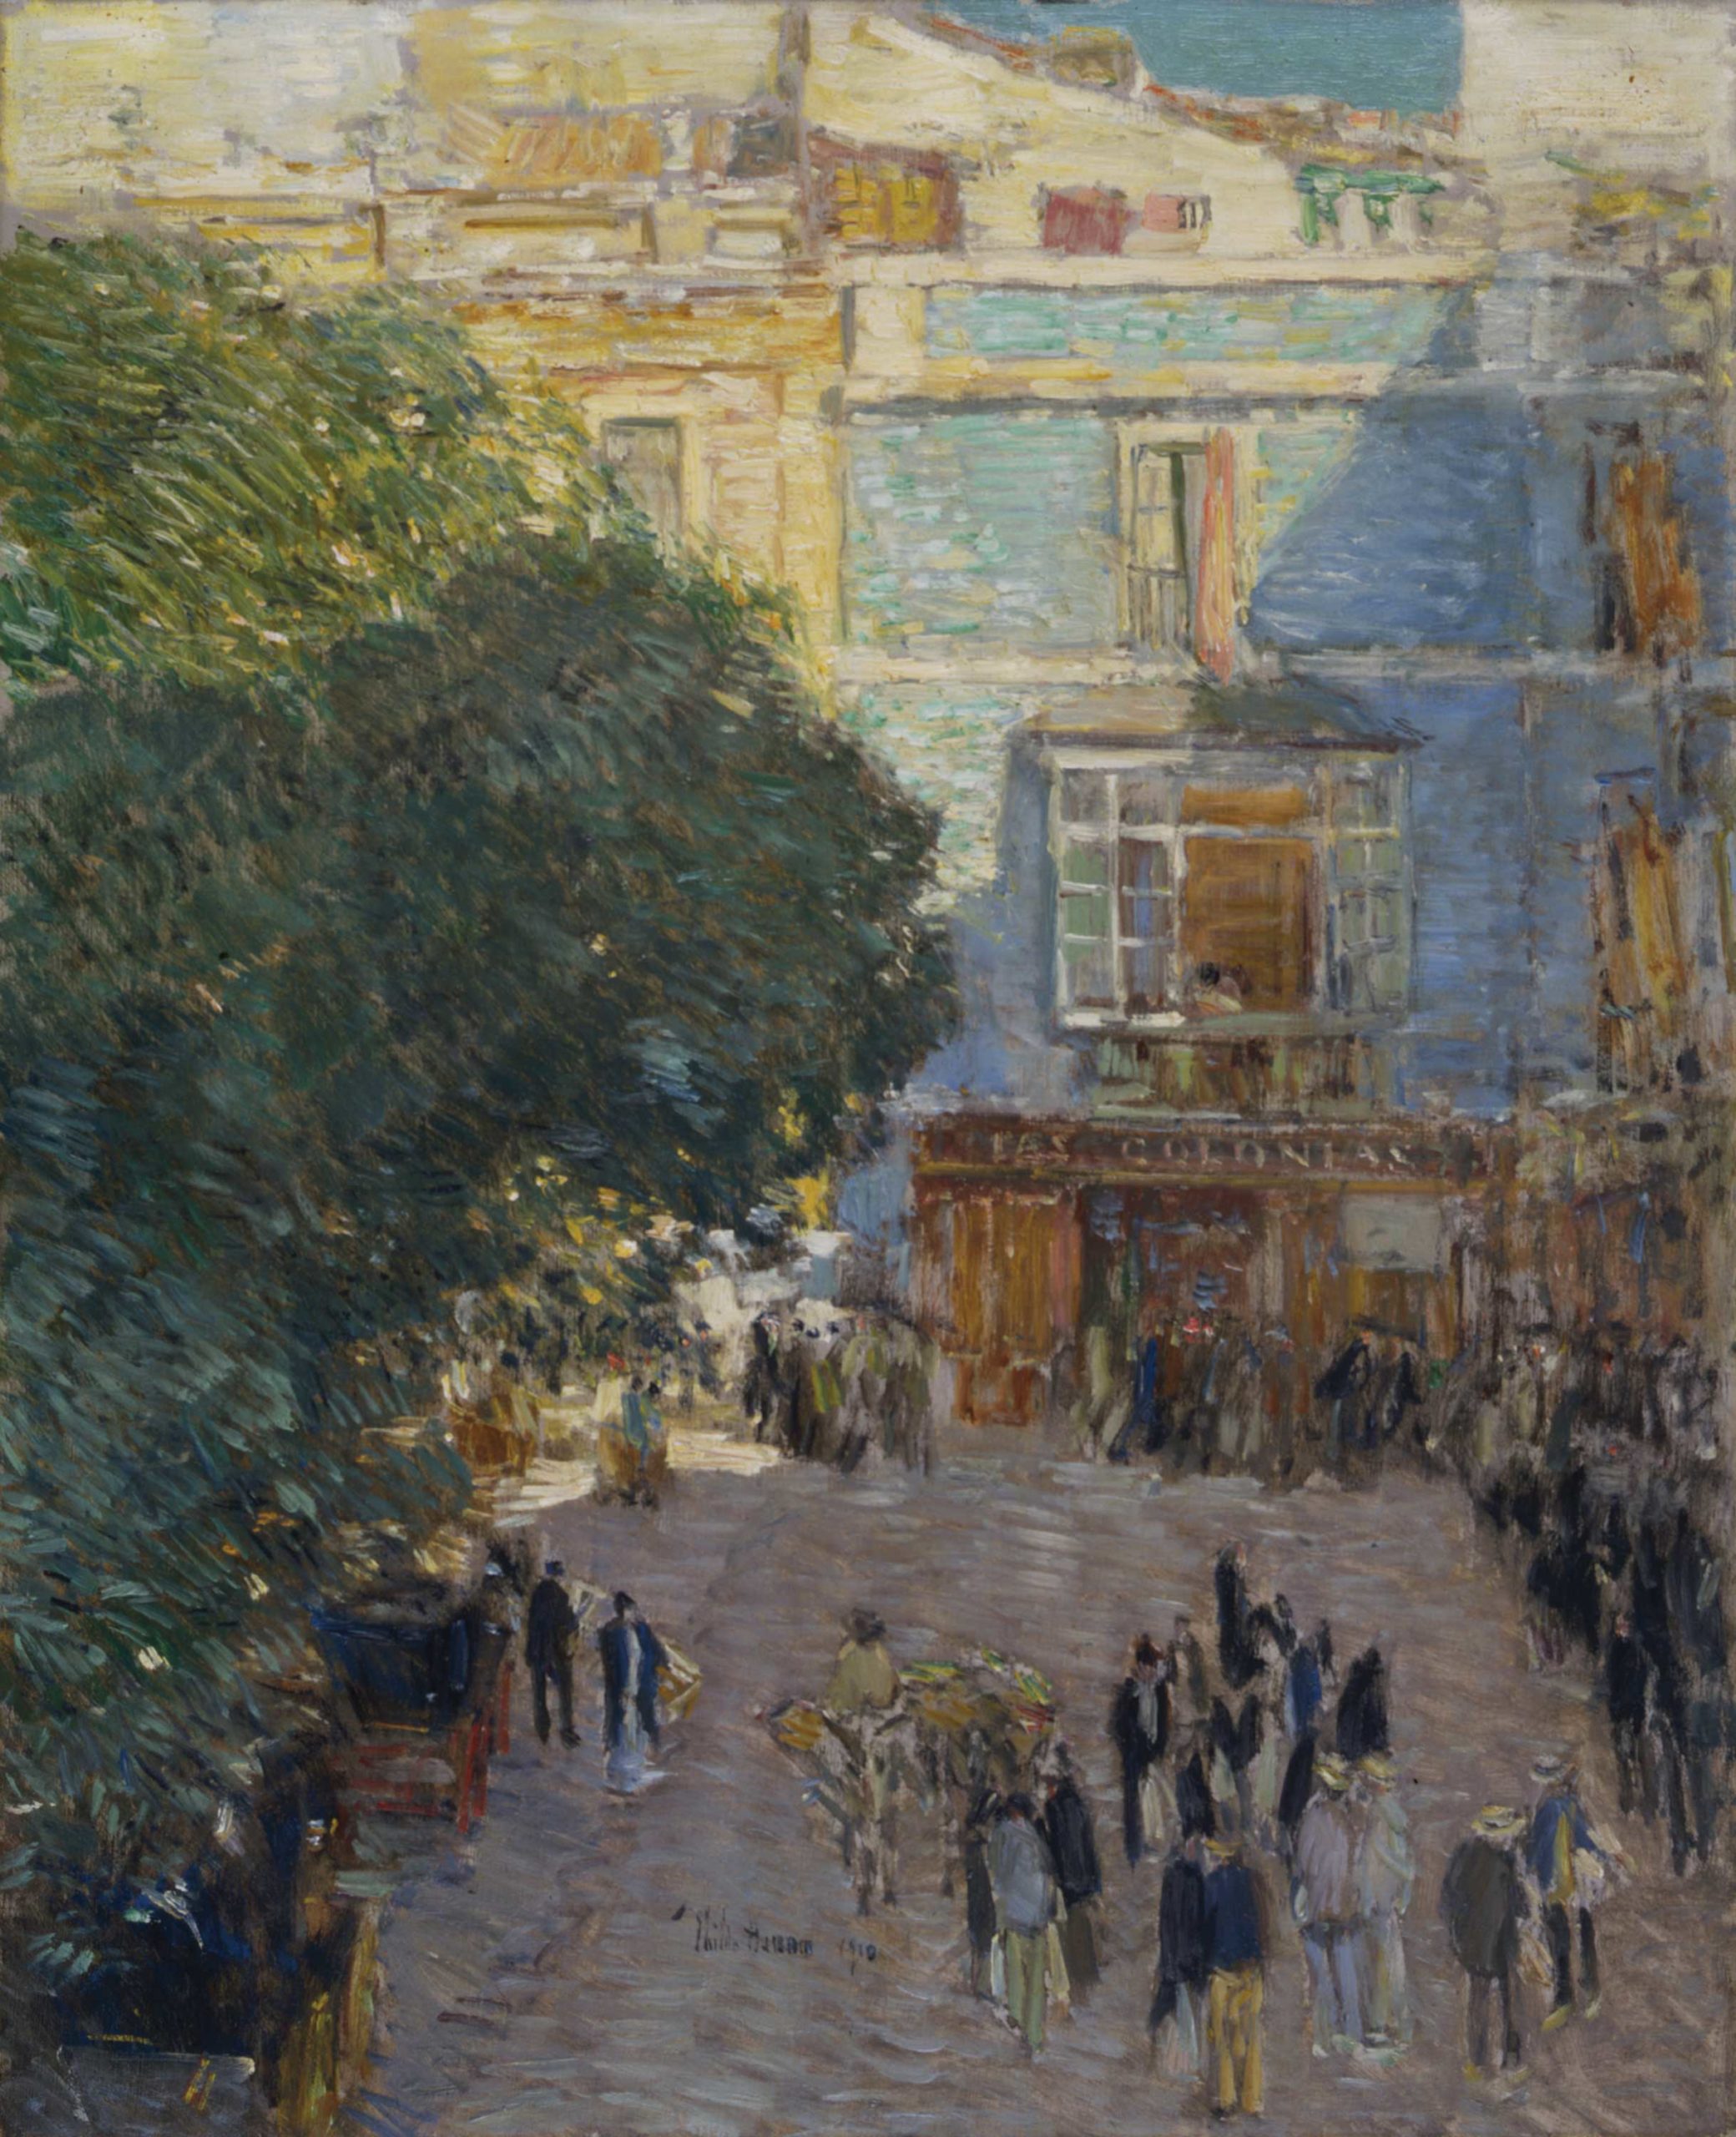 Childe Hassam (1859-1935), "Square at Seville," 1910, oil on panel, 25 9/16 x 20 13/16 in.